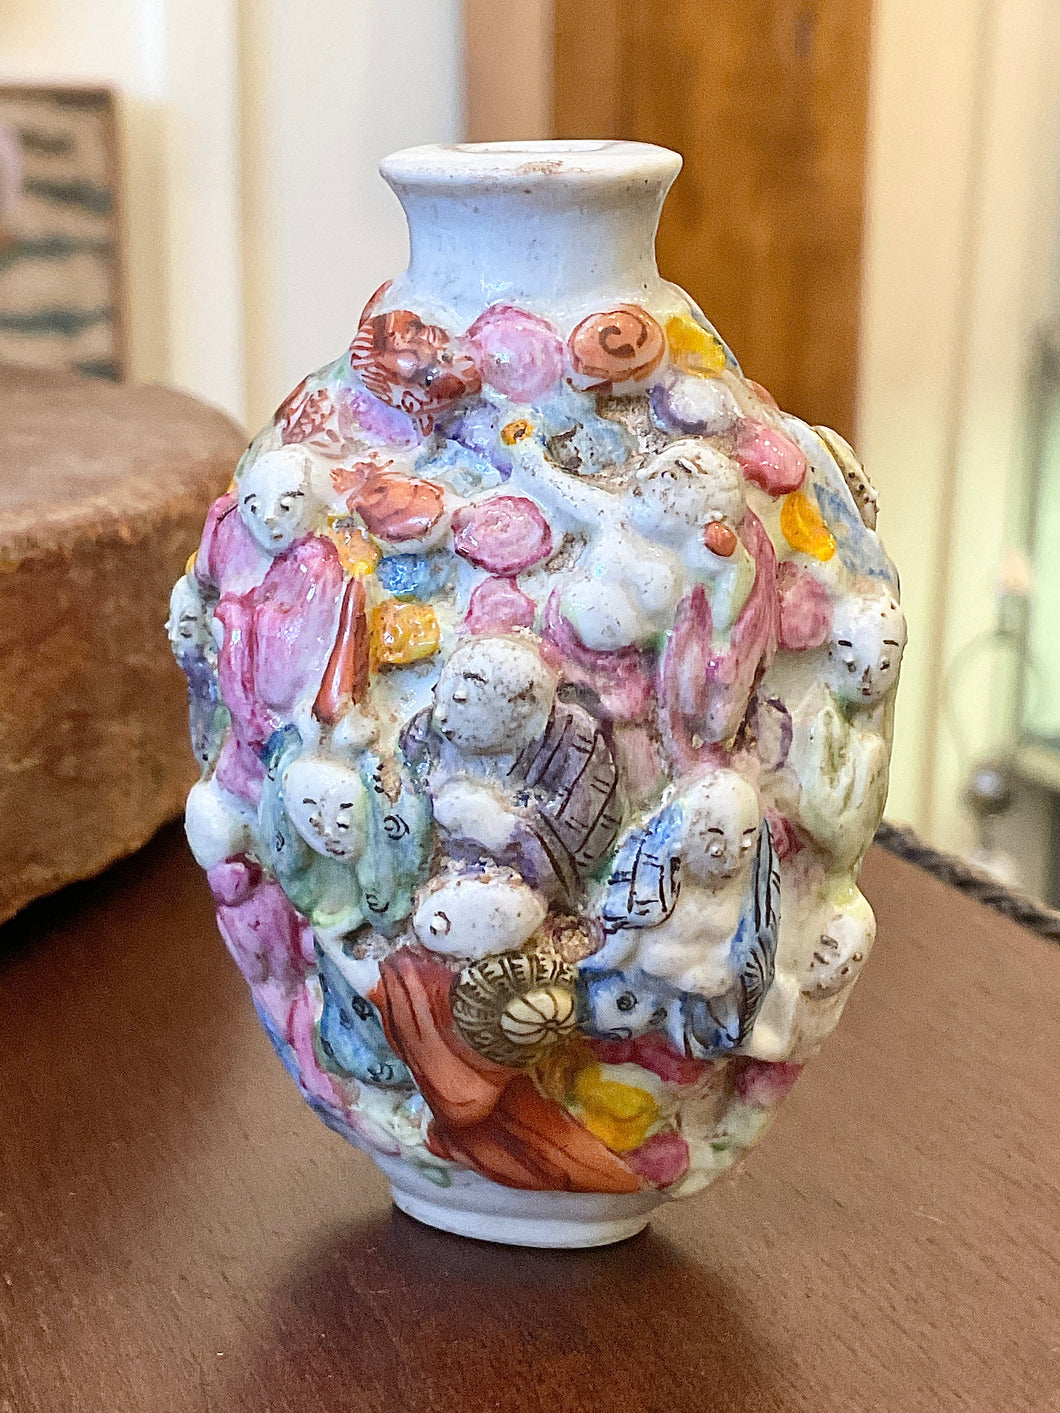 19th Century Chinese Snuff Bottle featuring the Eight Immortals